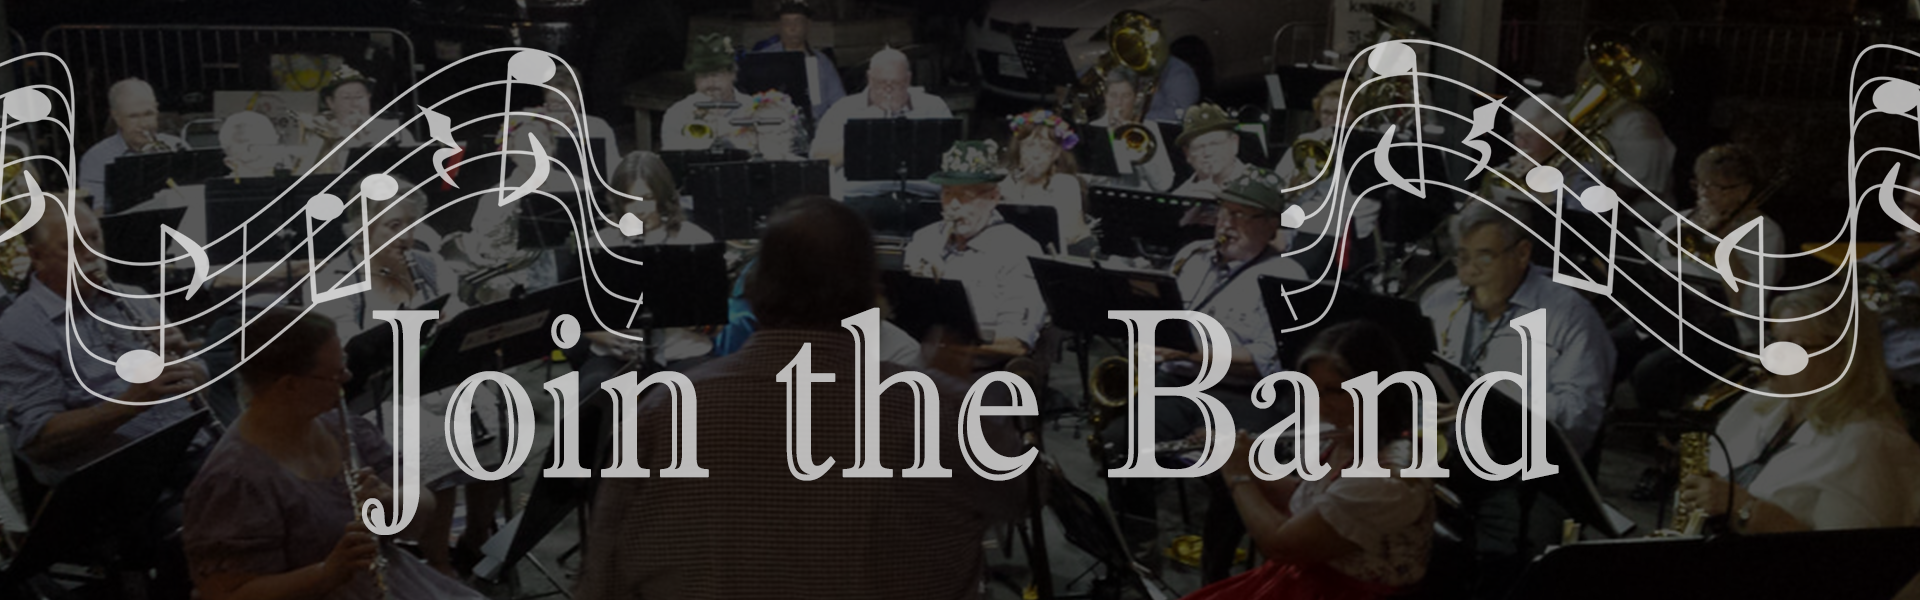 Join the Comal Community Band